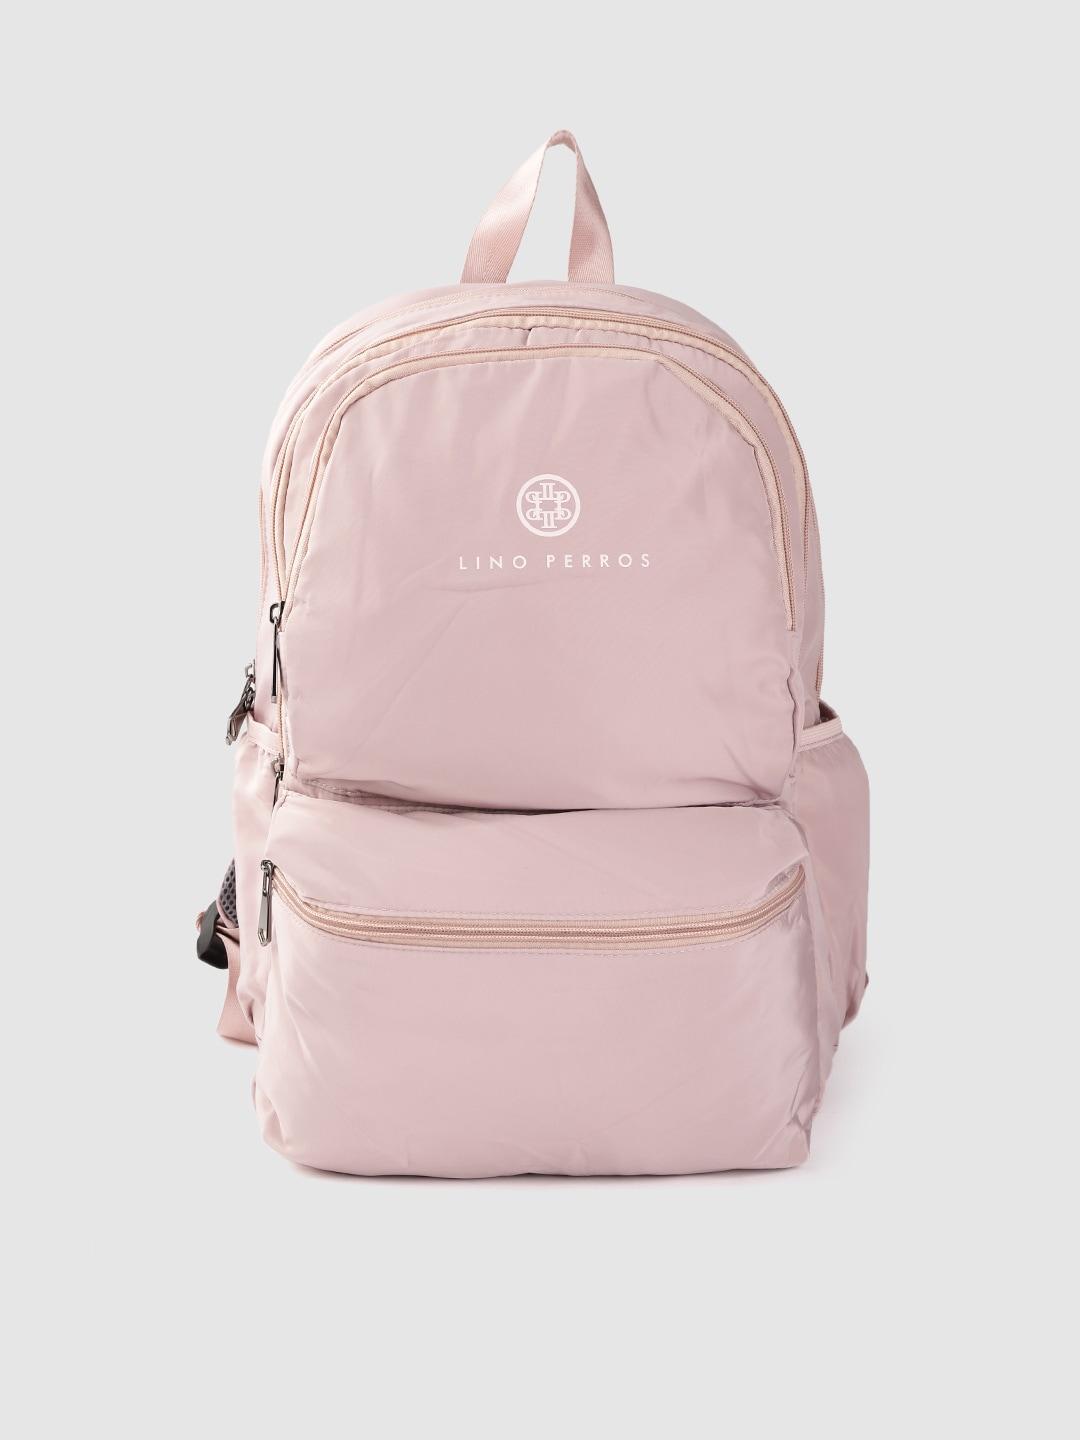 lino-perros-women-dusty-pink-solid-13-inch-laptop-backpack